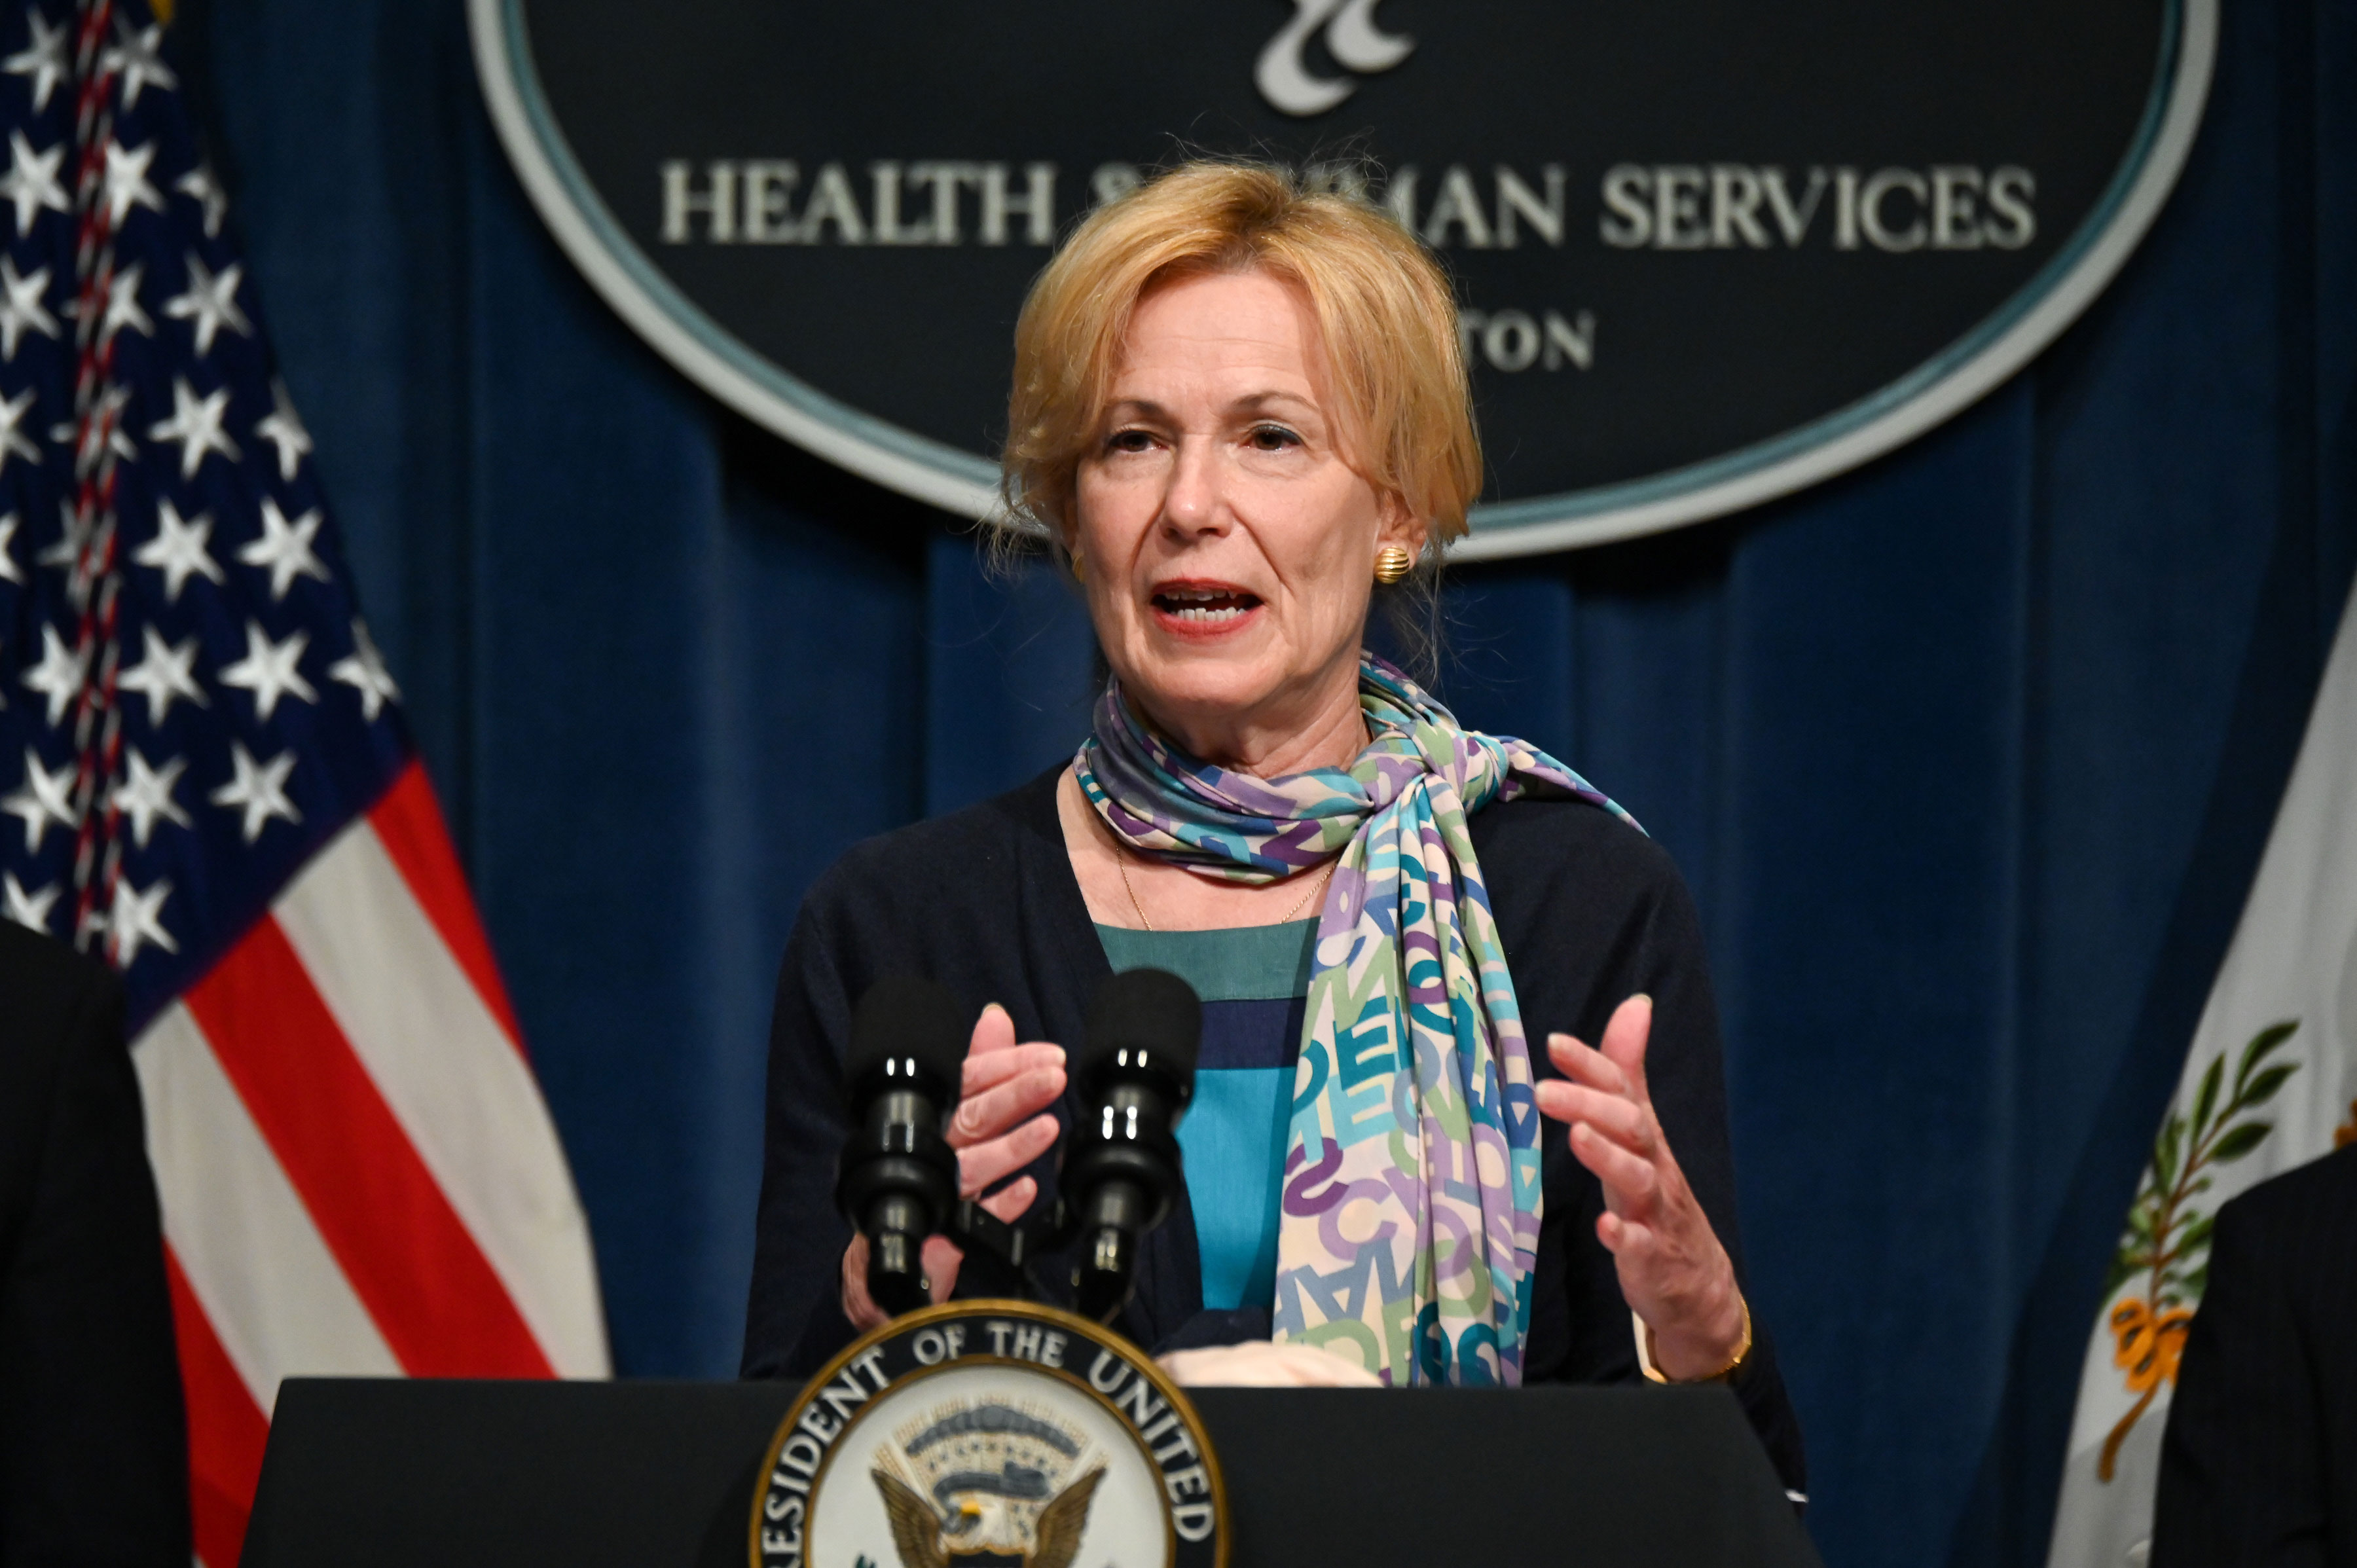 Dr. Deborah Birx speaks during a coronavirus briefing at the Department of Health and Human Services on June 26.